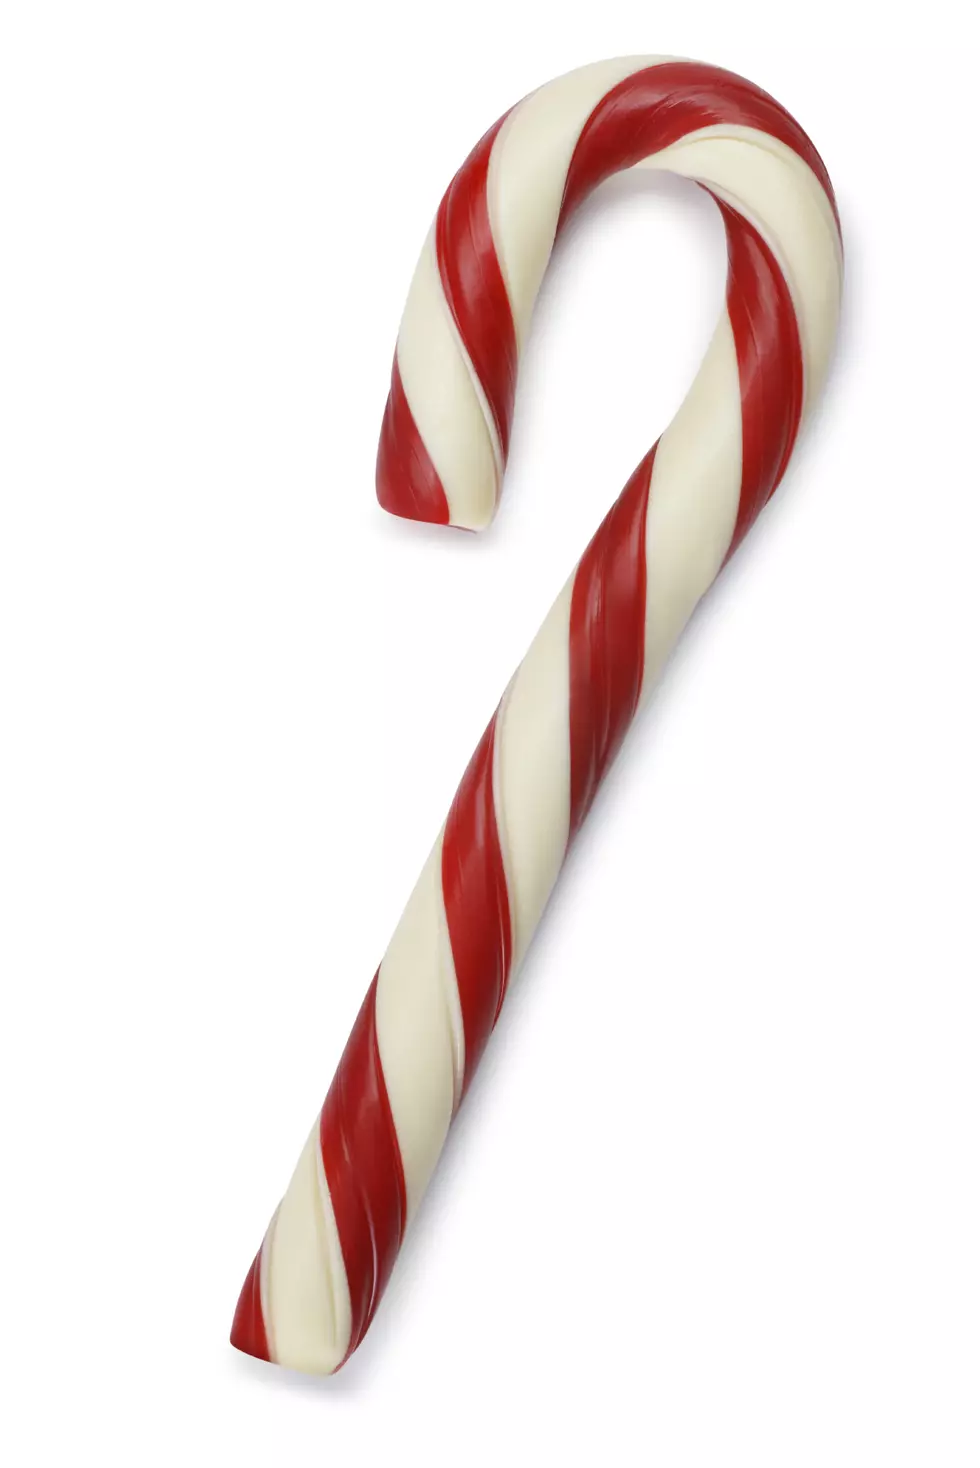 How The Candy Cane Became A Christmas Tradition